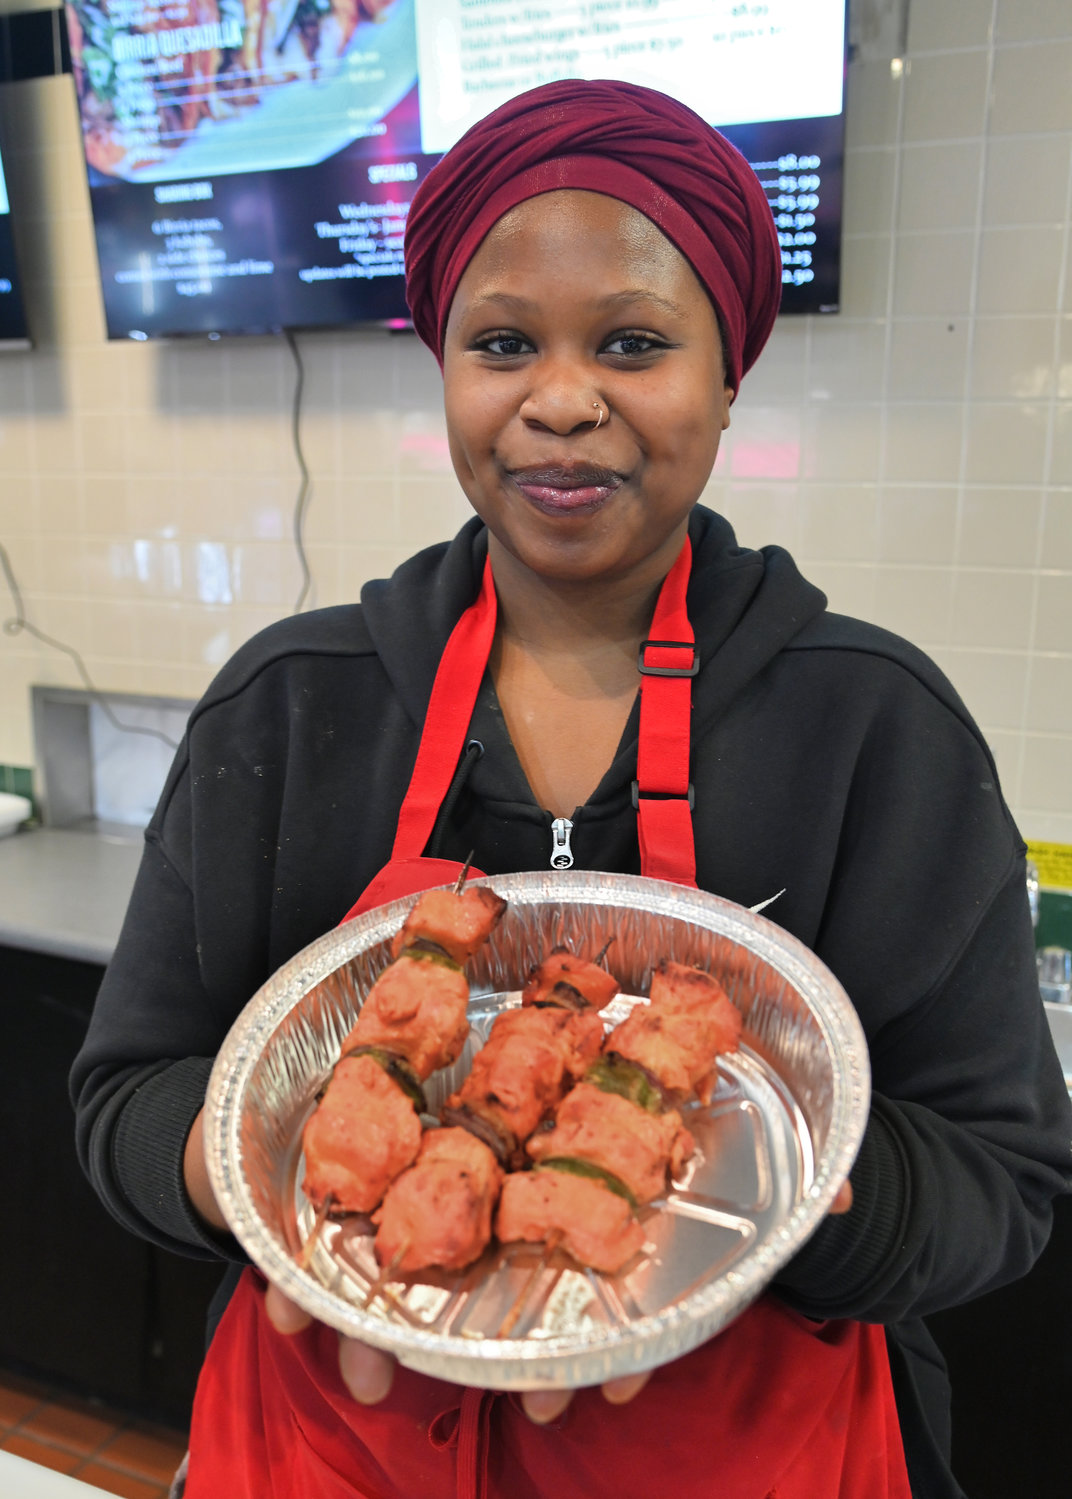 Luley Jibril of Jibril’s Kitchen at Sangertown Square with chicken kabobs ­­­— a specialty of the restaurant.